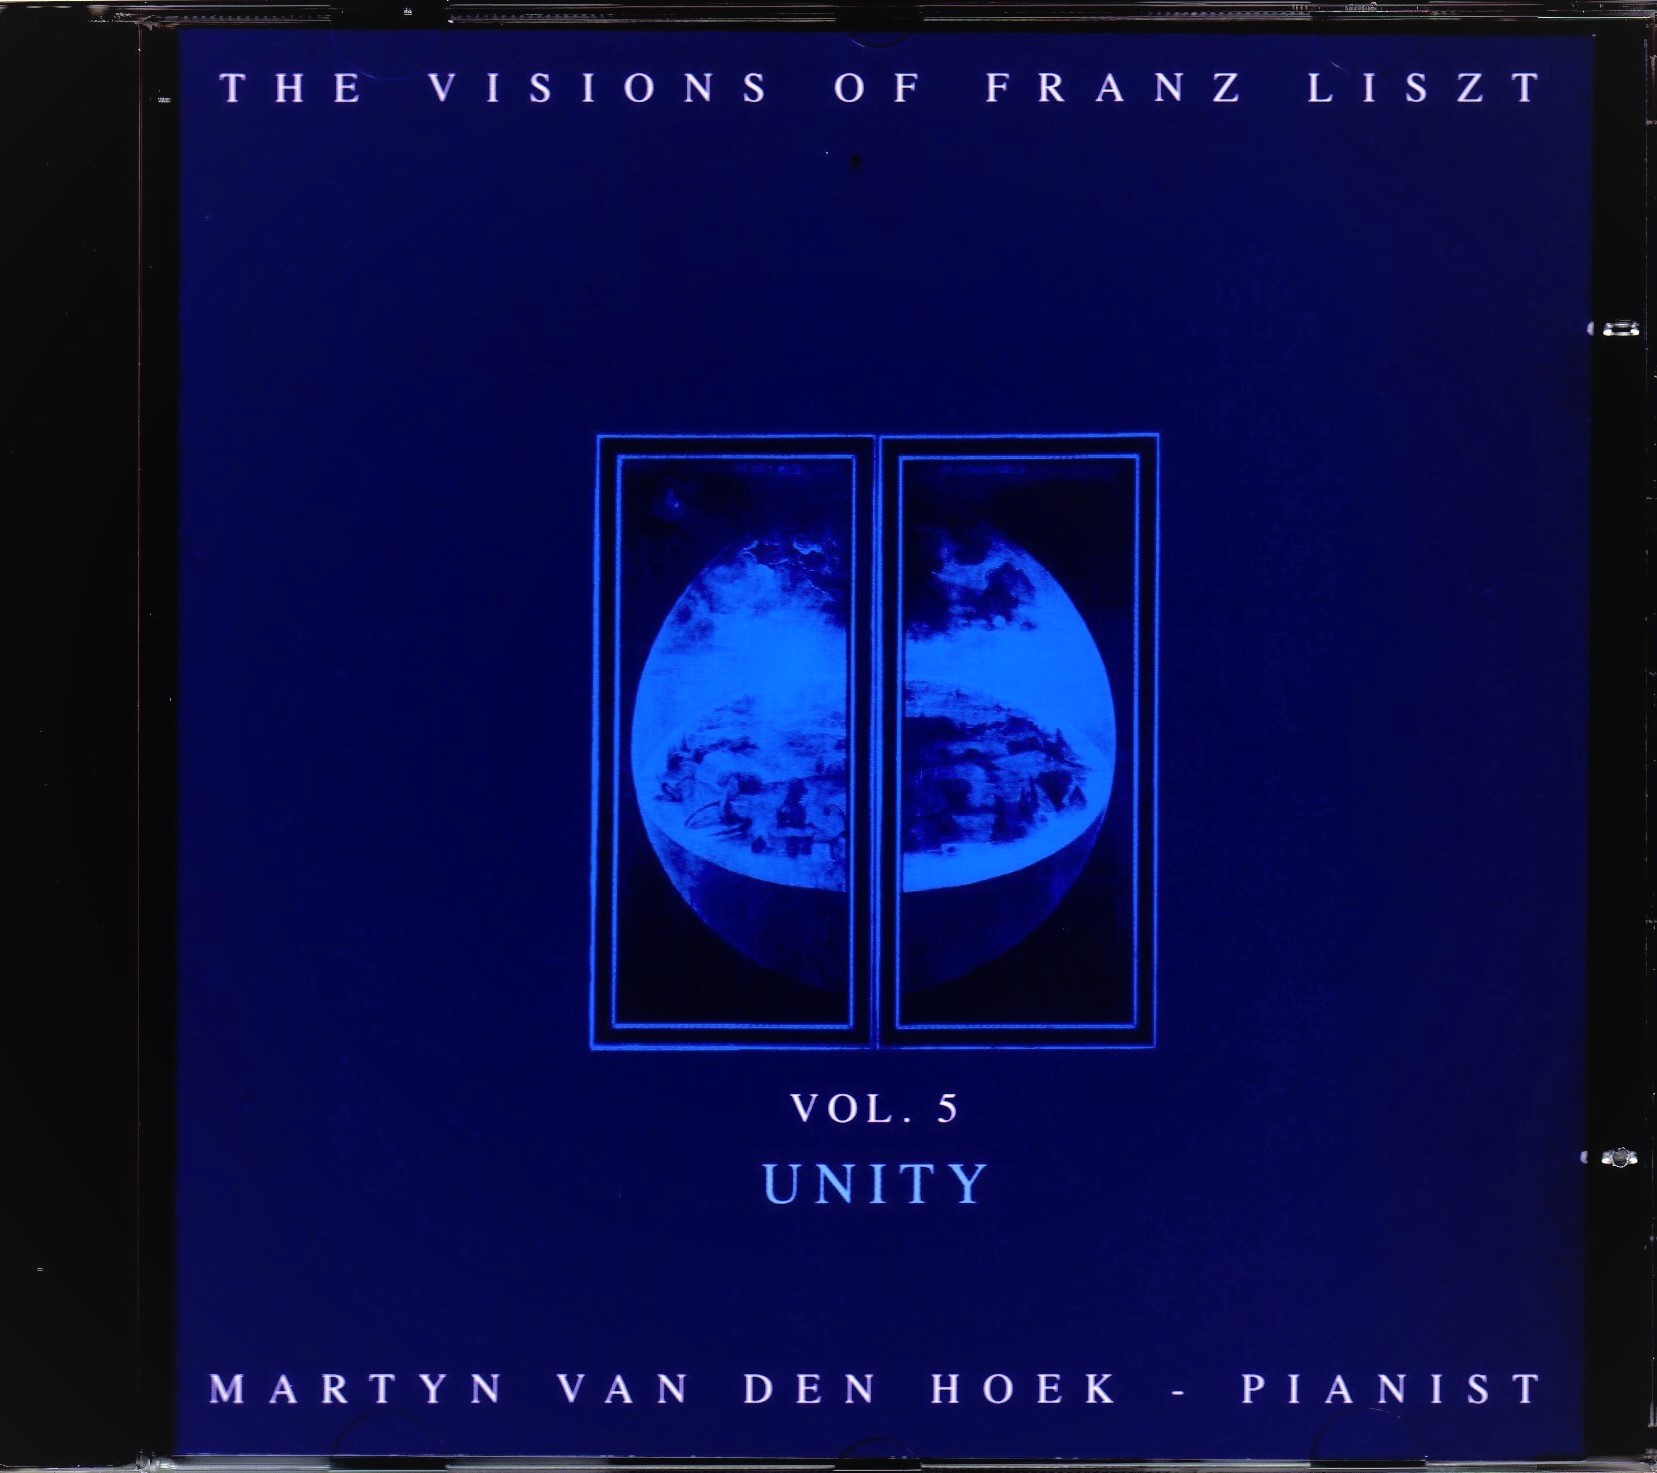 The Visions of Franz Liszt Vol.5"The Unity"